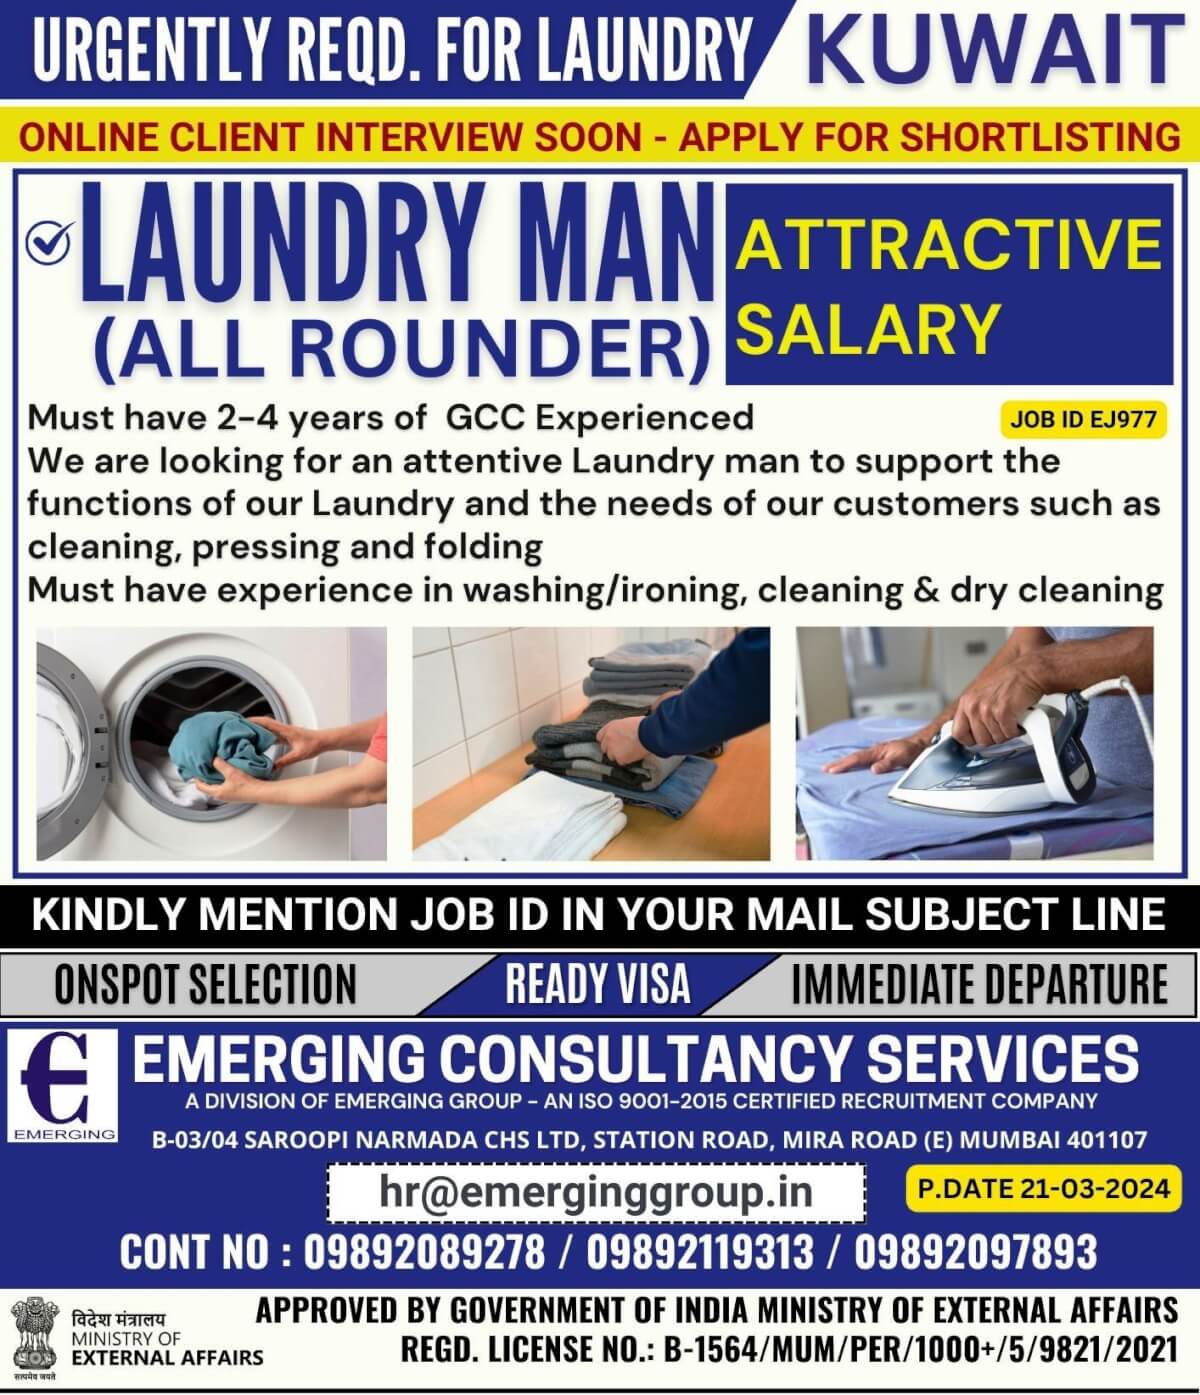 URGENTLY REQD. FOR LAUNDRY MAN IN KUWAIT